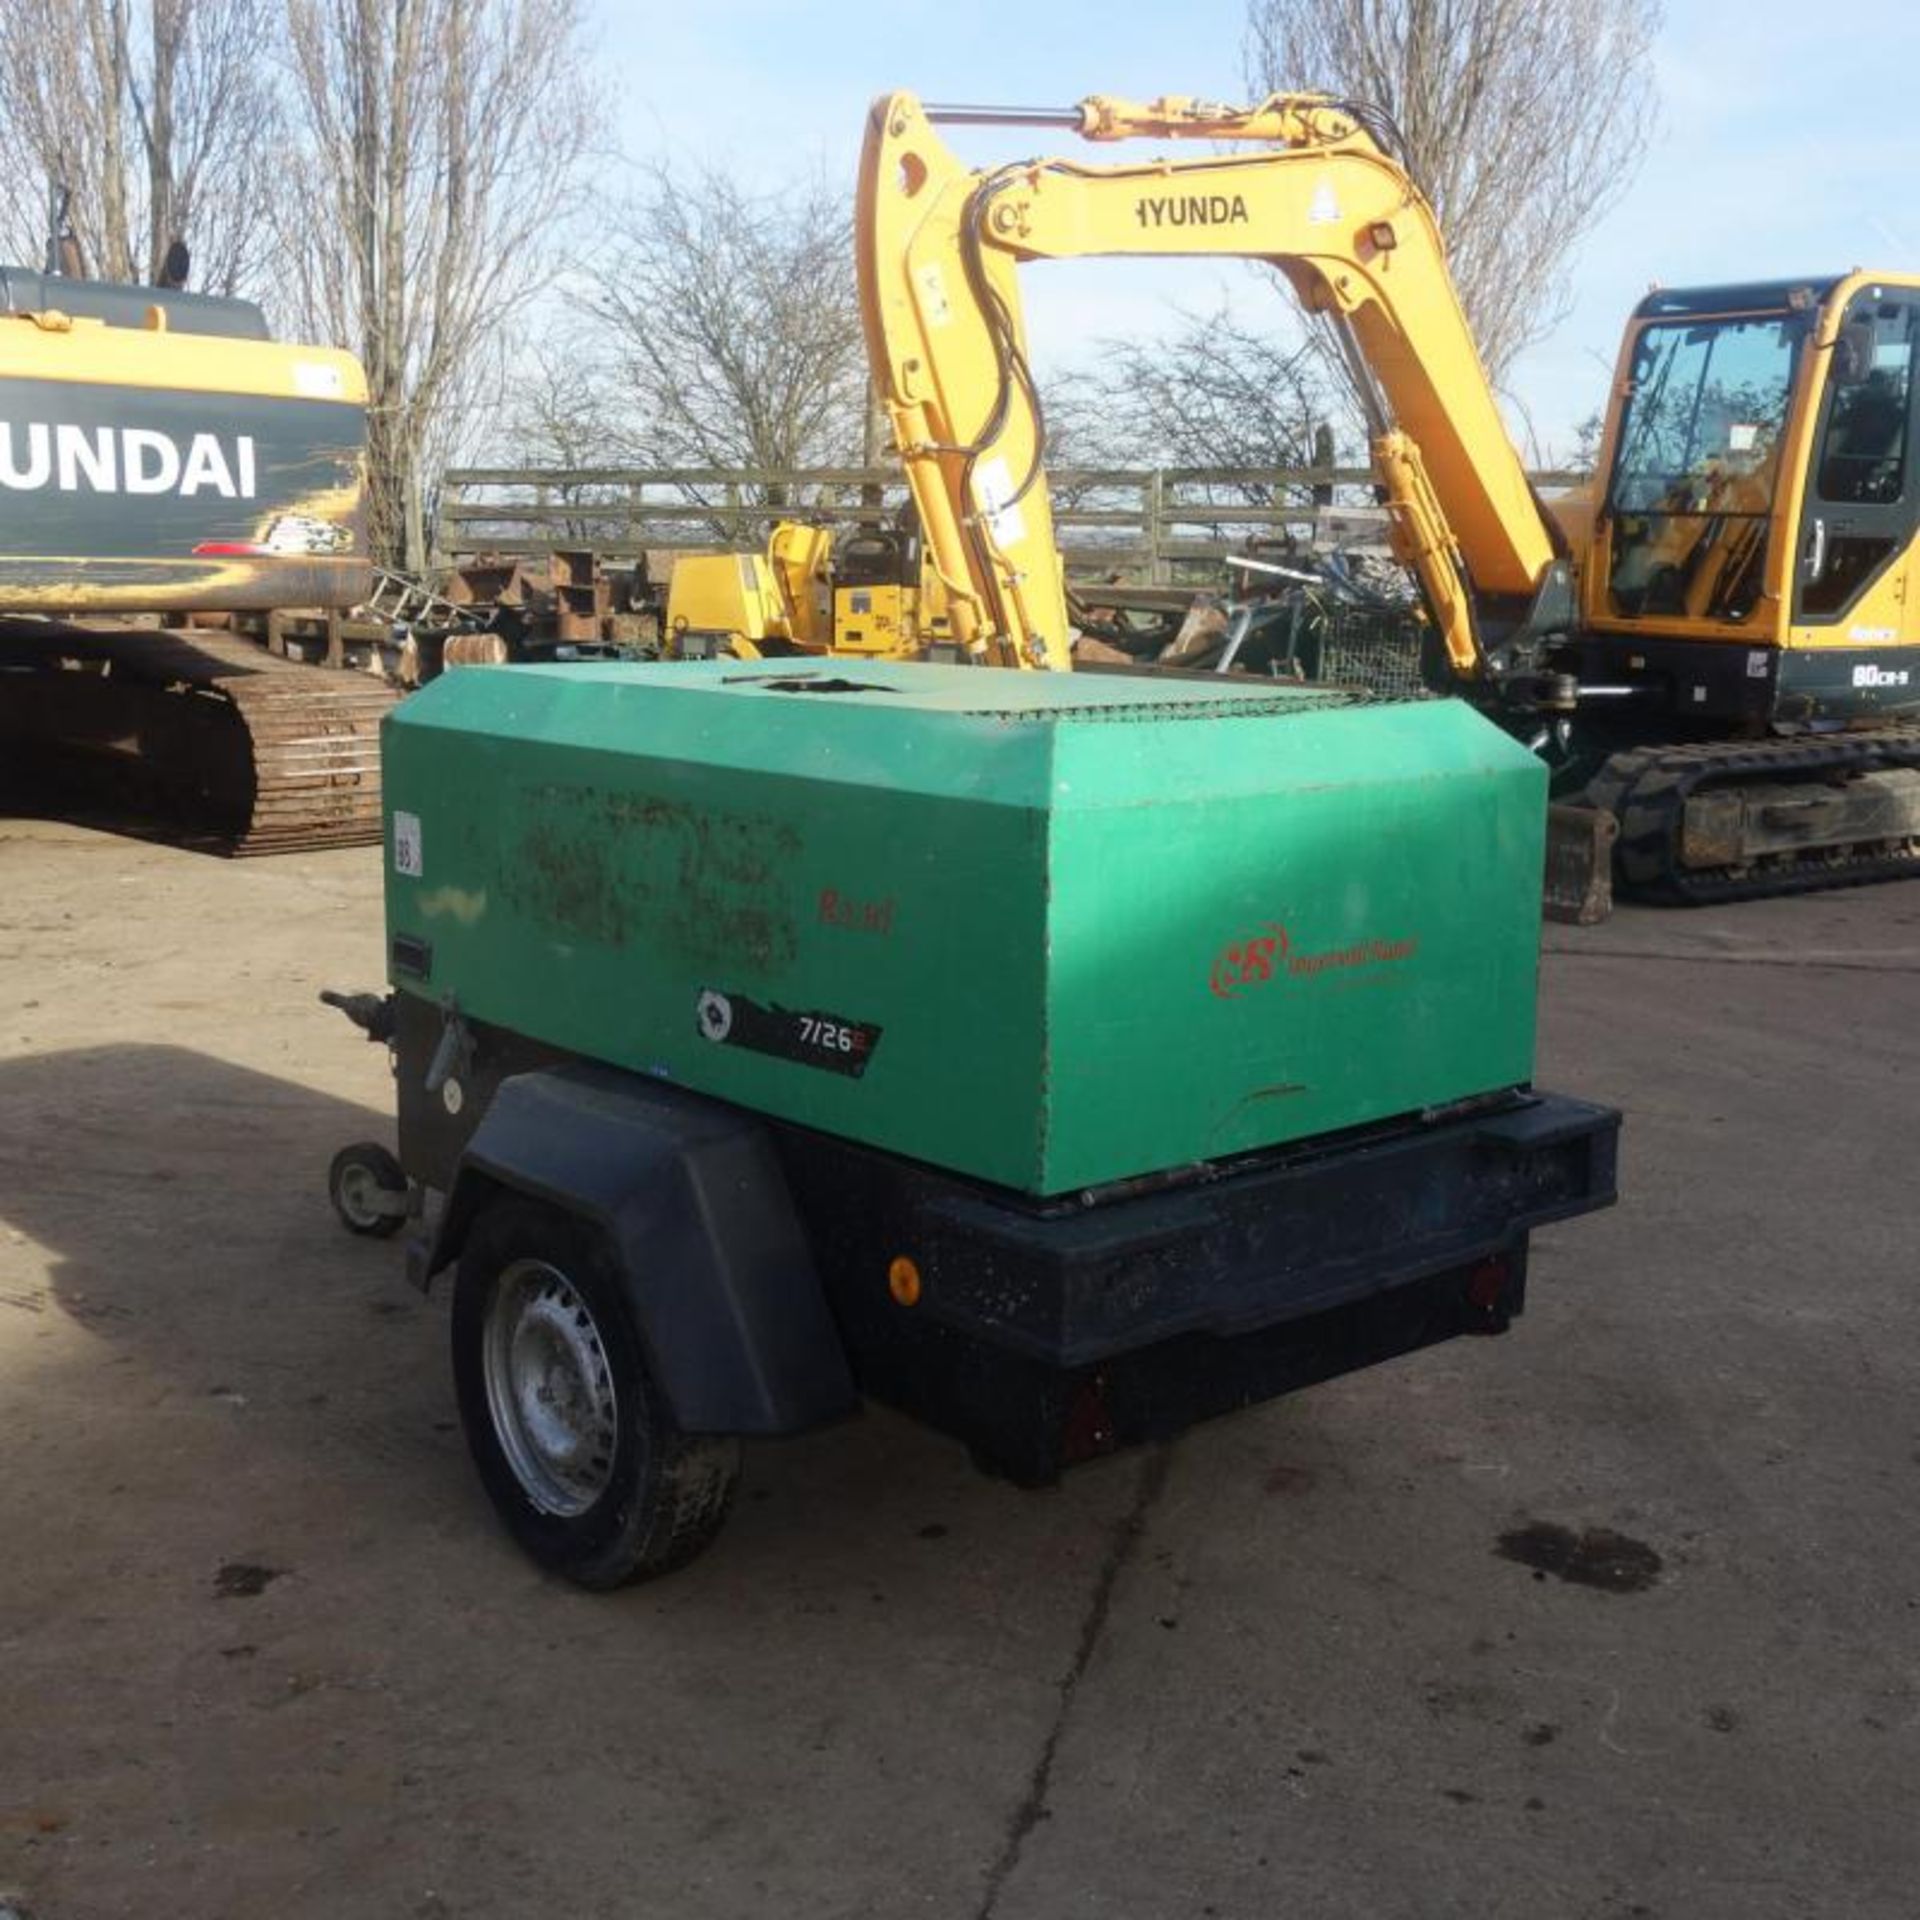 2006 Inersollrand 726e Compressor, Only 3702 Hours From New - Image 3 of 6